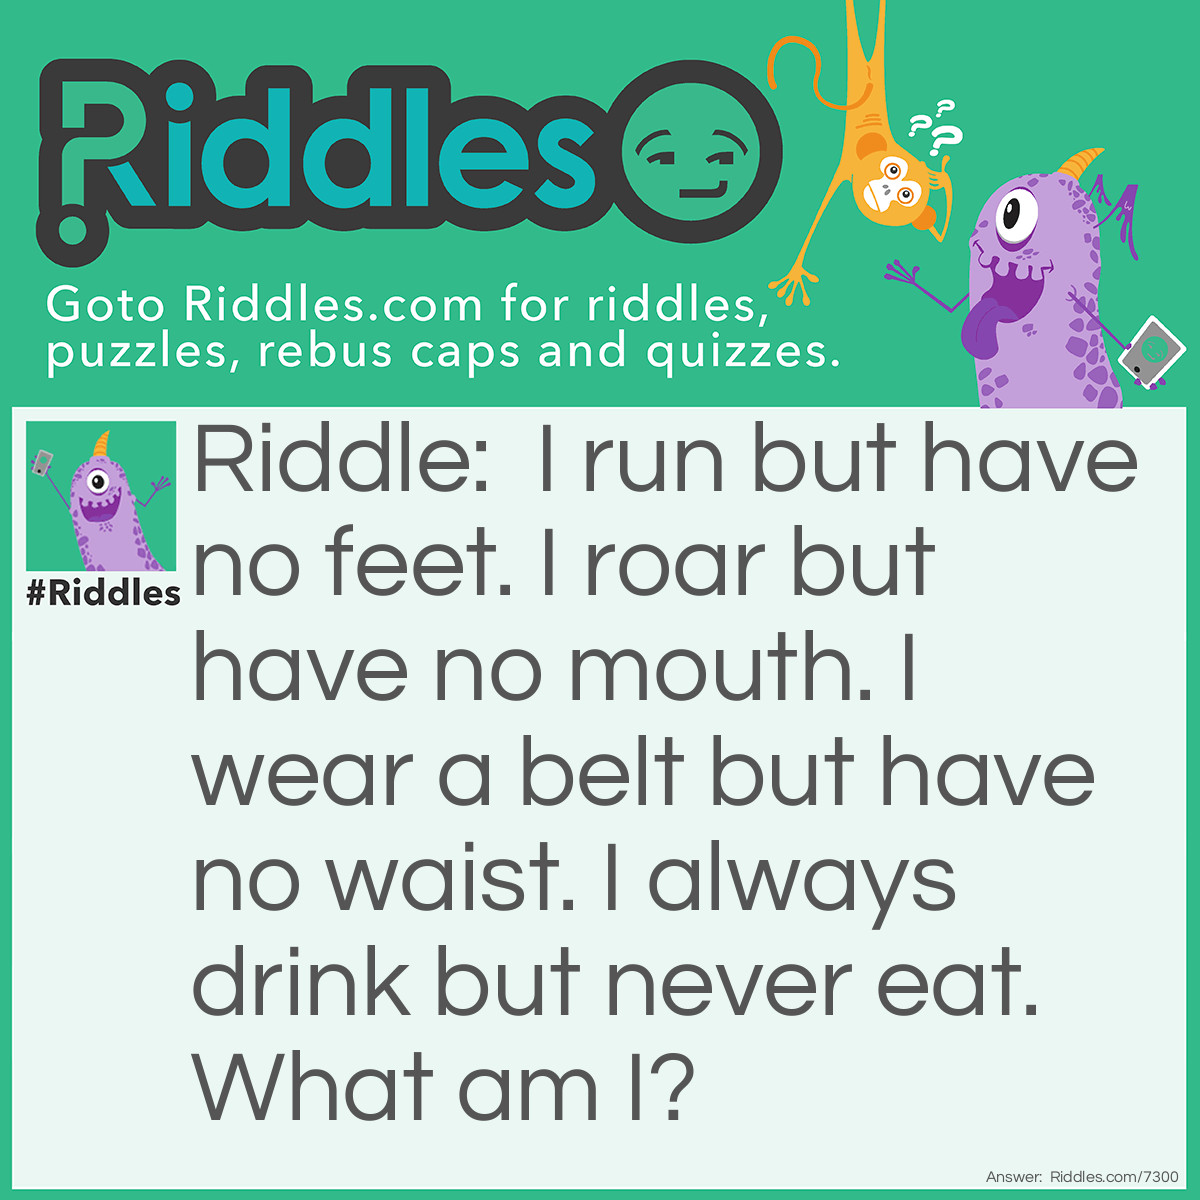 Riddle: I run but have no feet. I roar but have no mouth. I wear a belt but have no waist. I always drink but never eat. What am I? Answer: An engine.